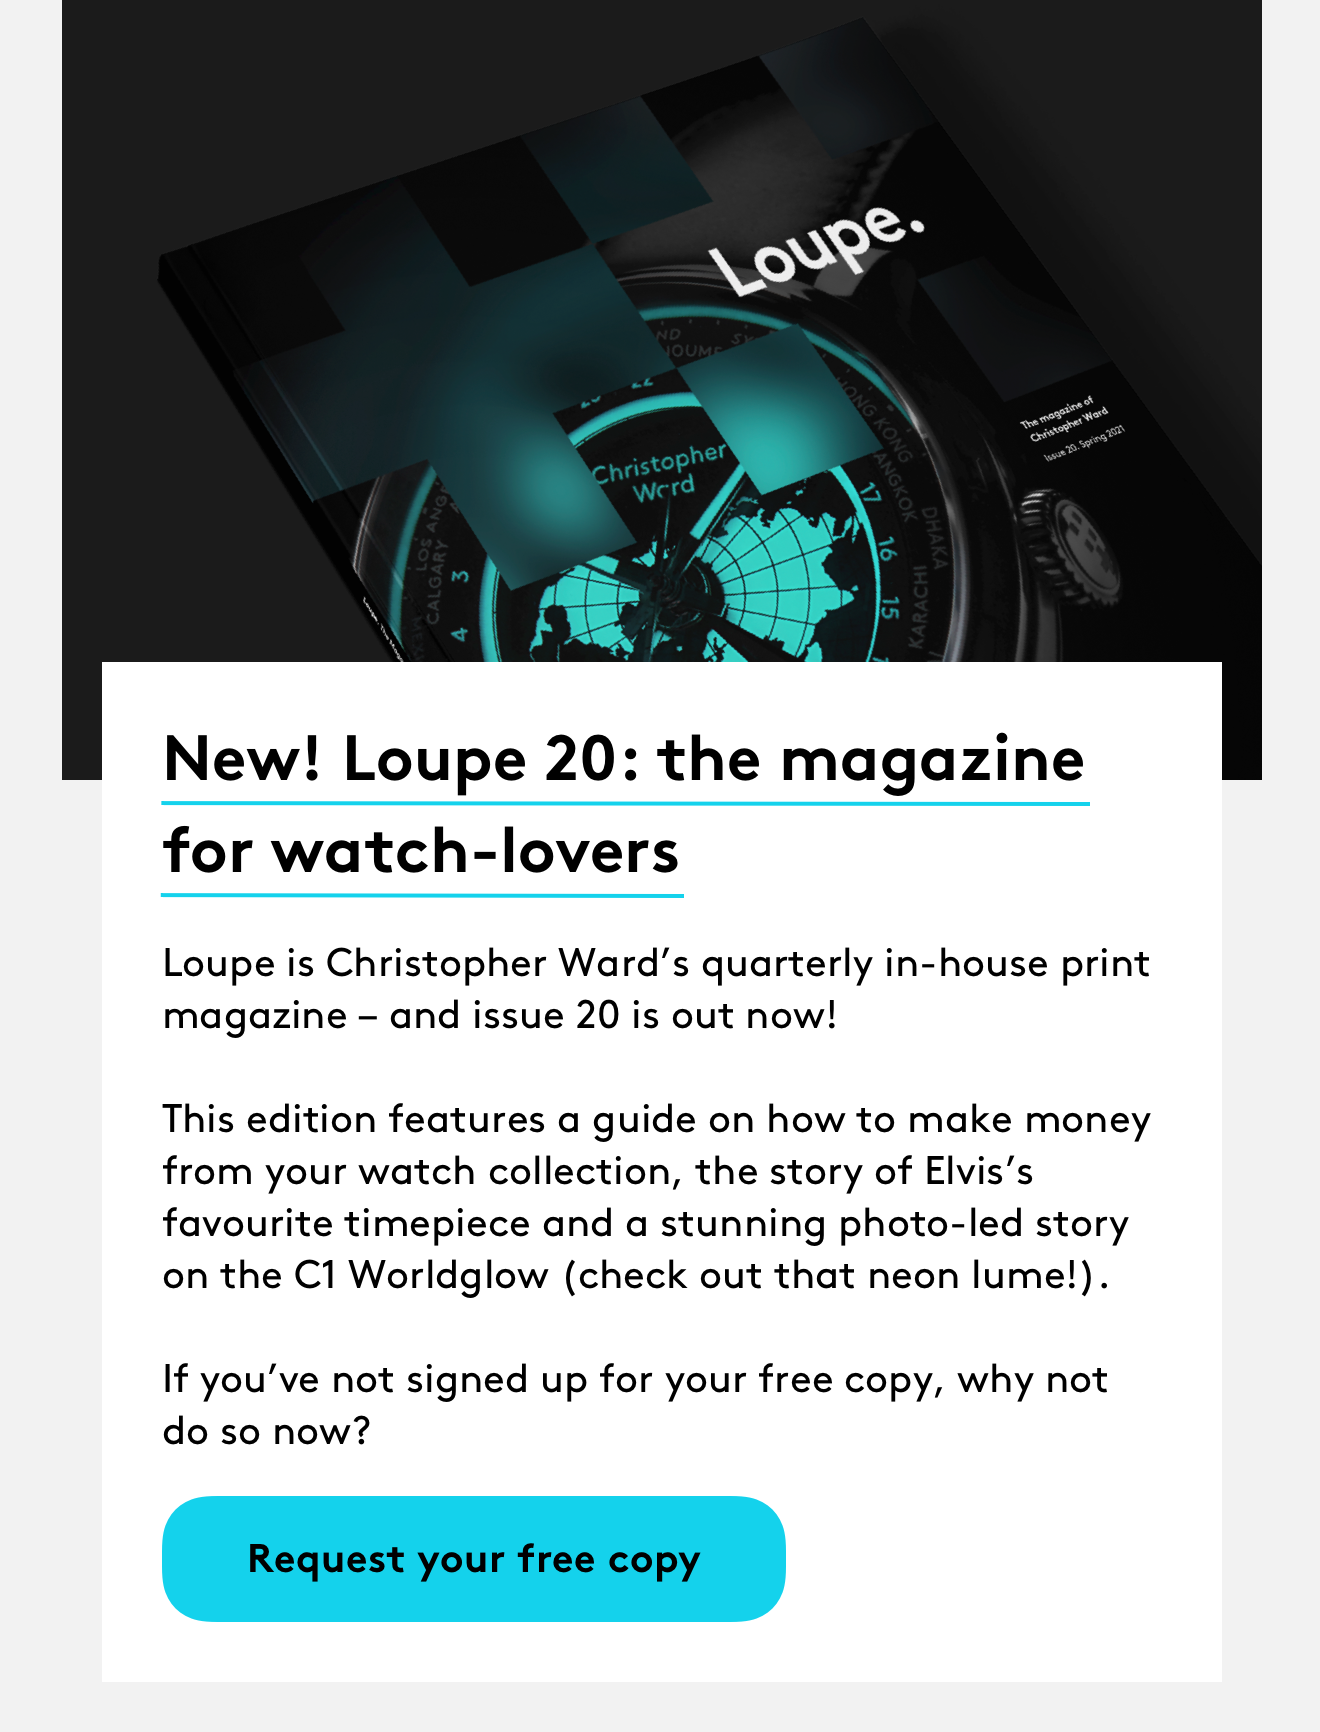 New! Loupe 20: the magazine for watch-lovers